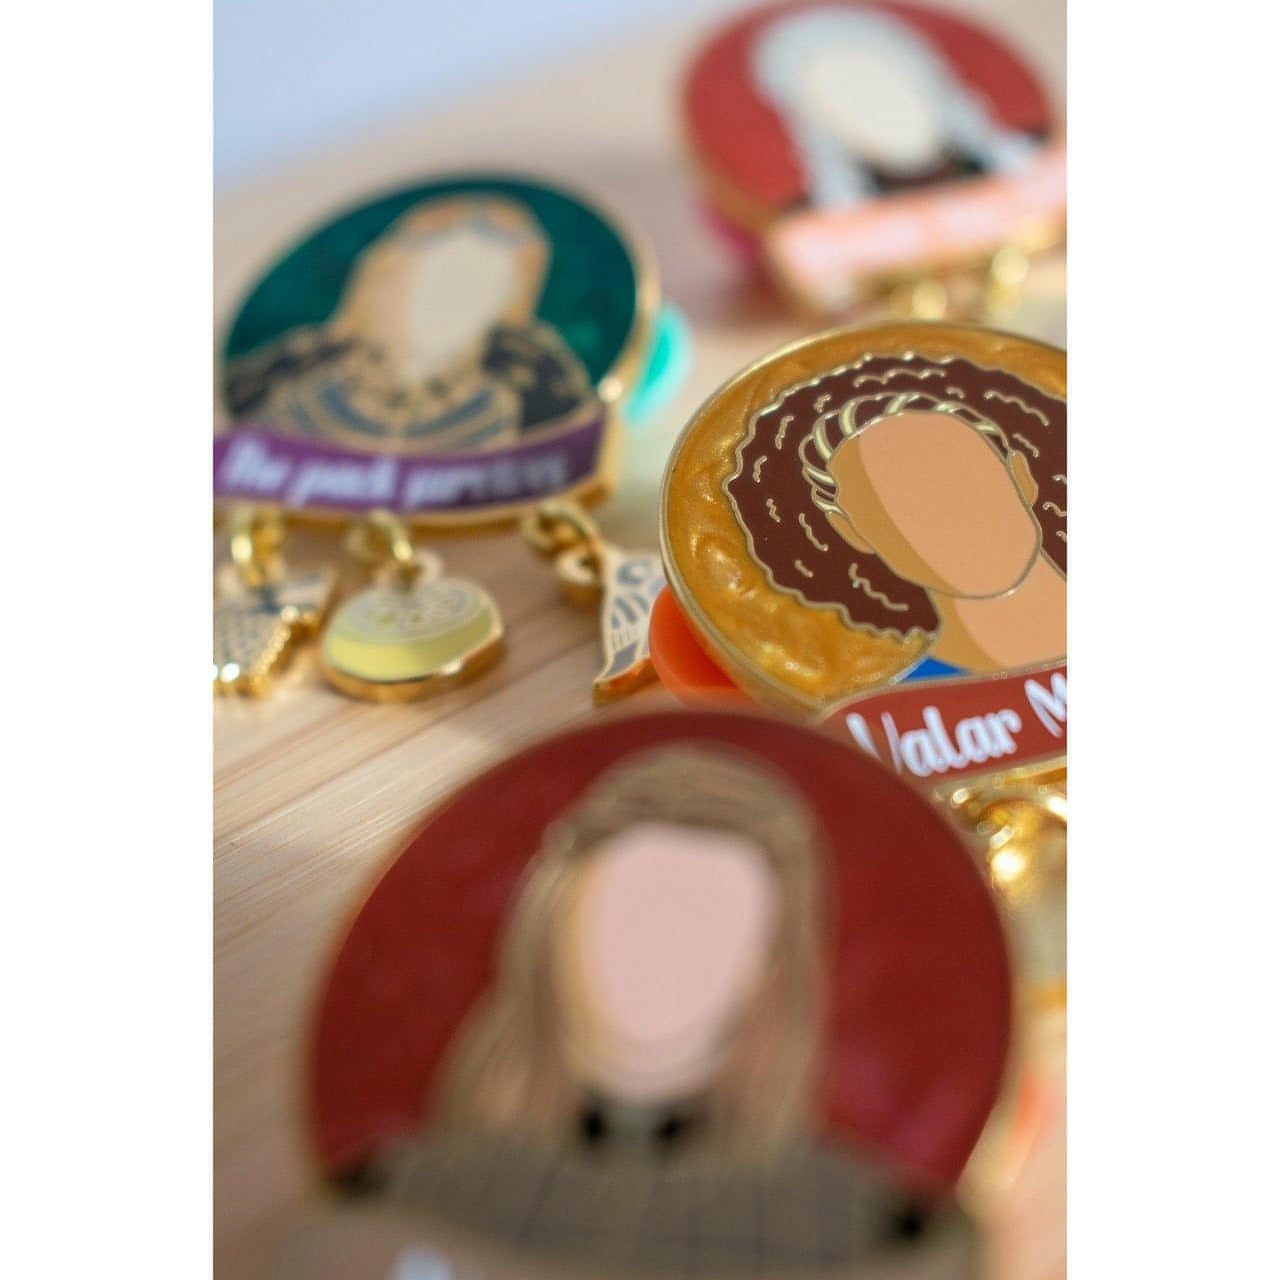 The image shows a close up of other Women of Westeros pins, and in focus is Missandei's orange pearl swirl background on her pin.